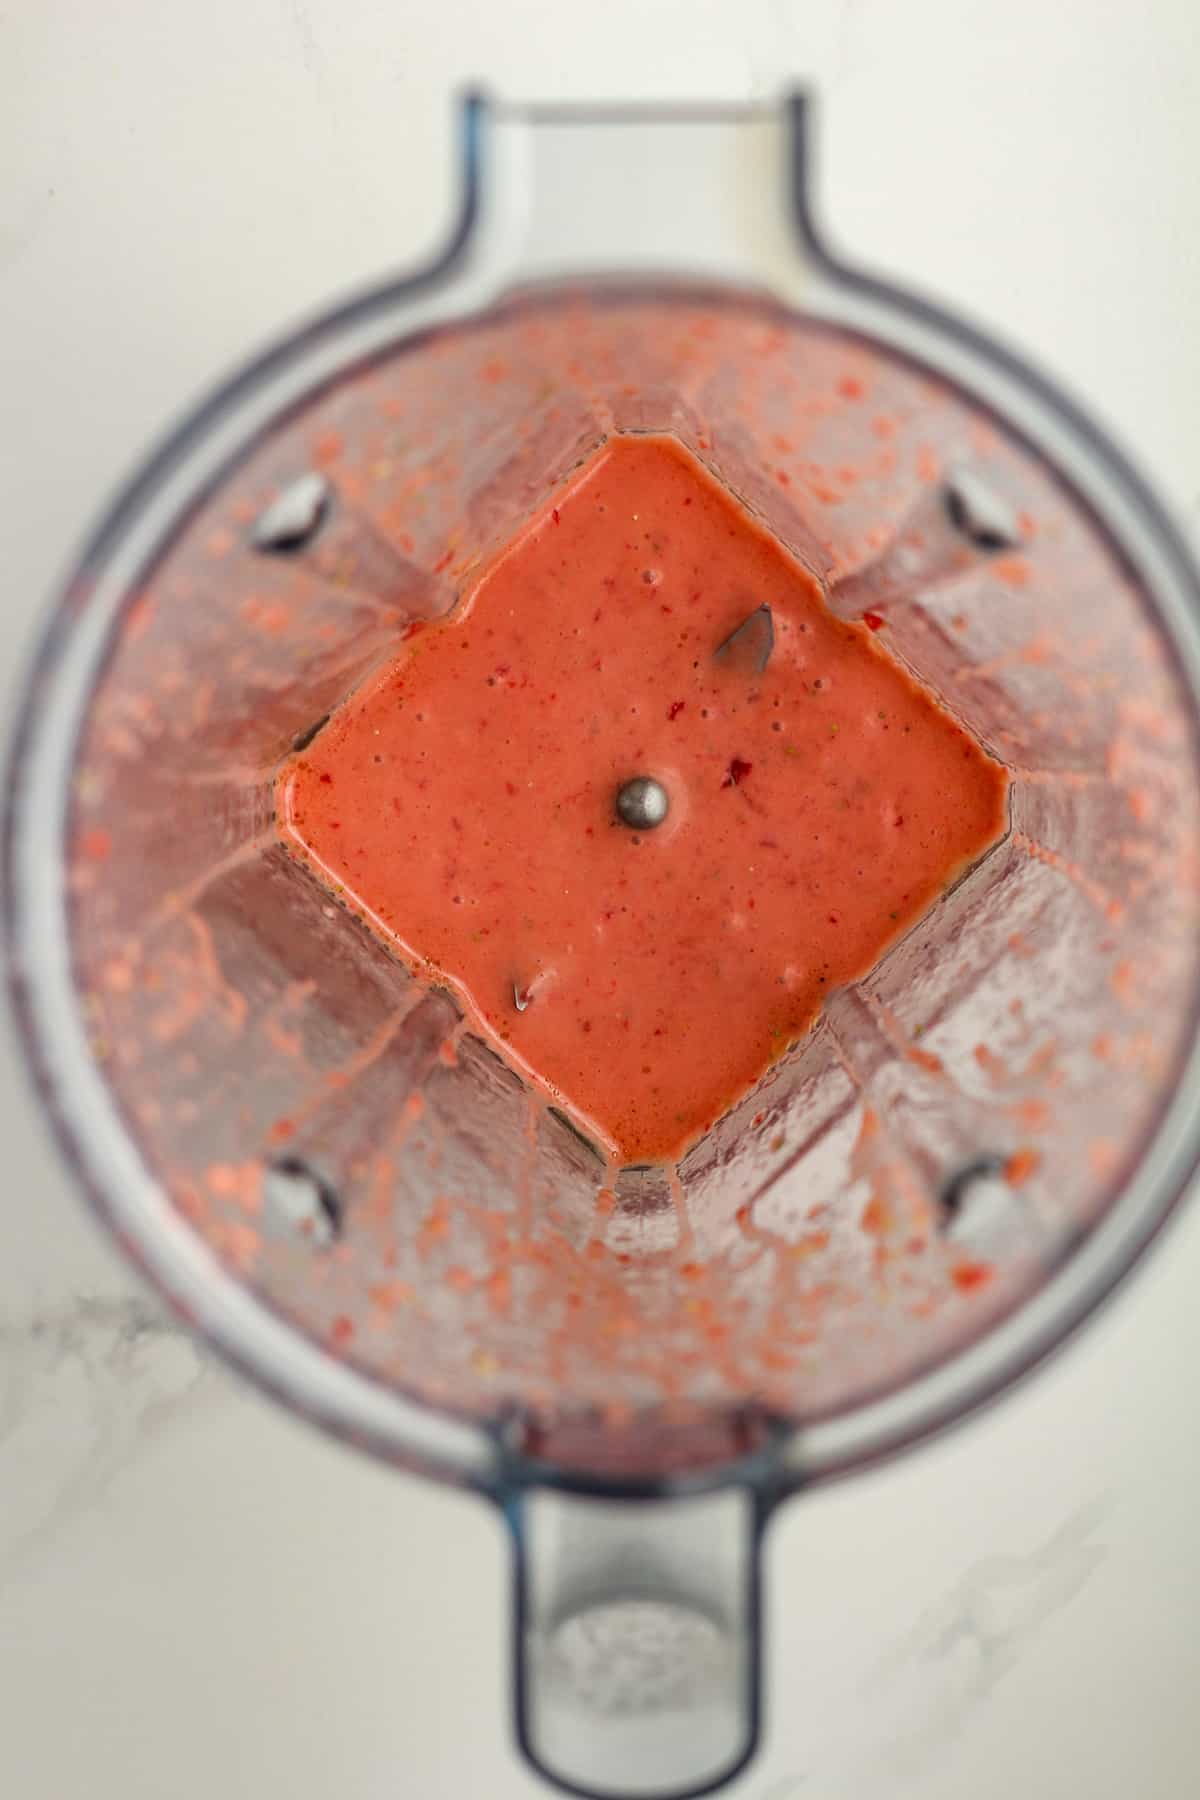 A mixer of the strawberry dressing.